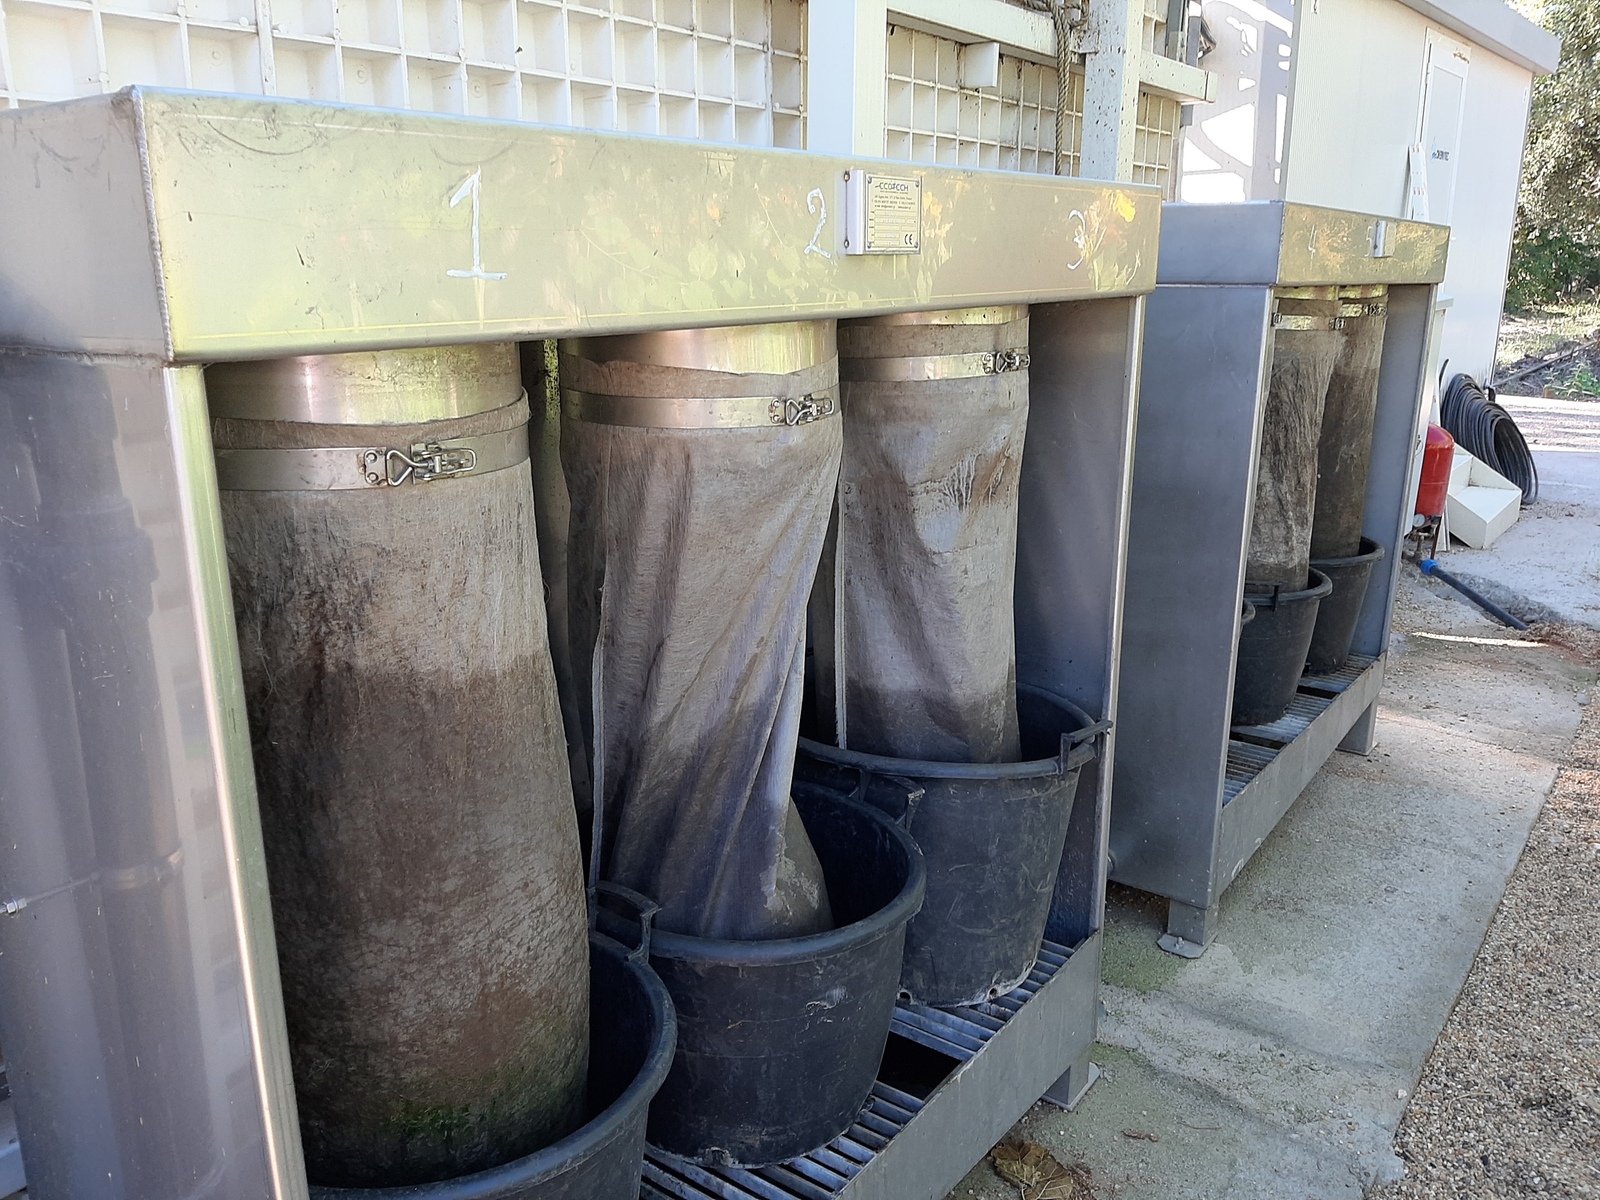 Smaller tanks full of sludge for compost production